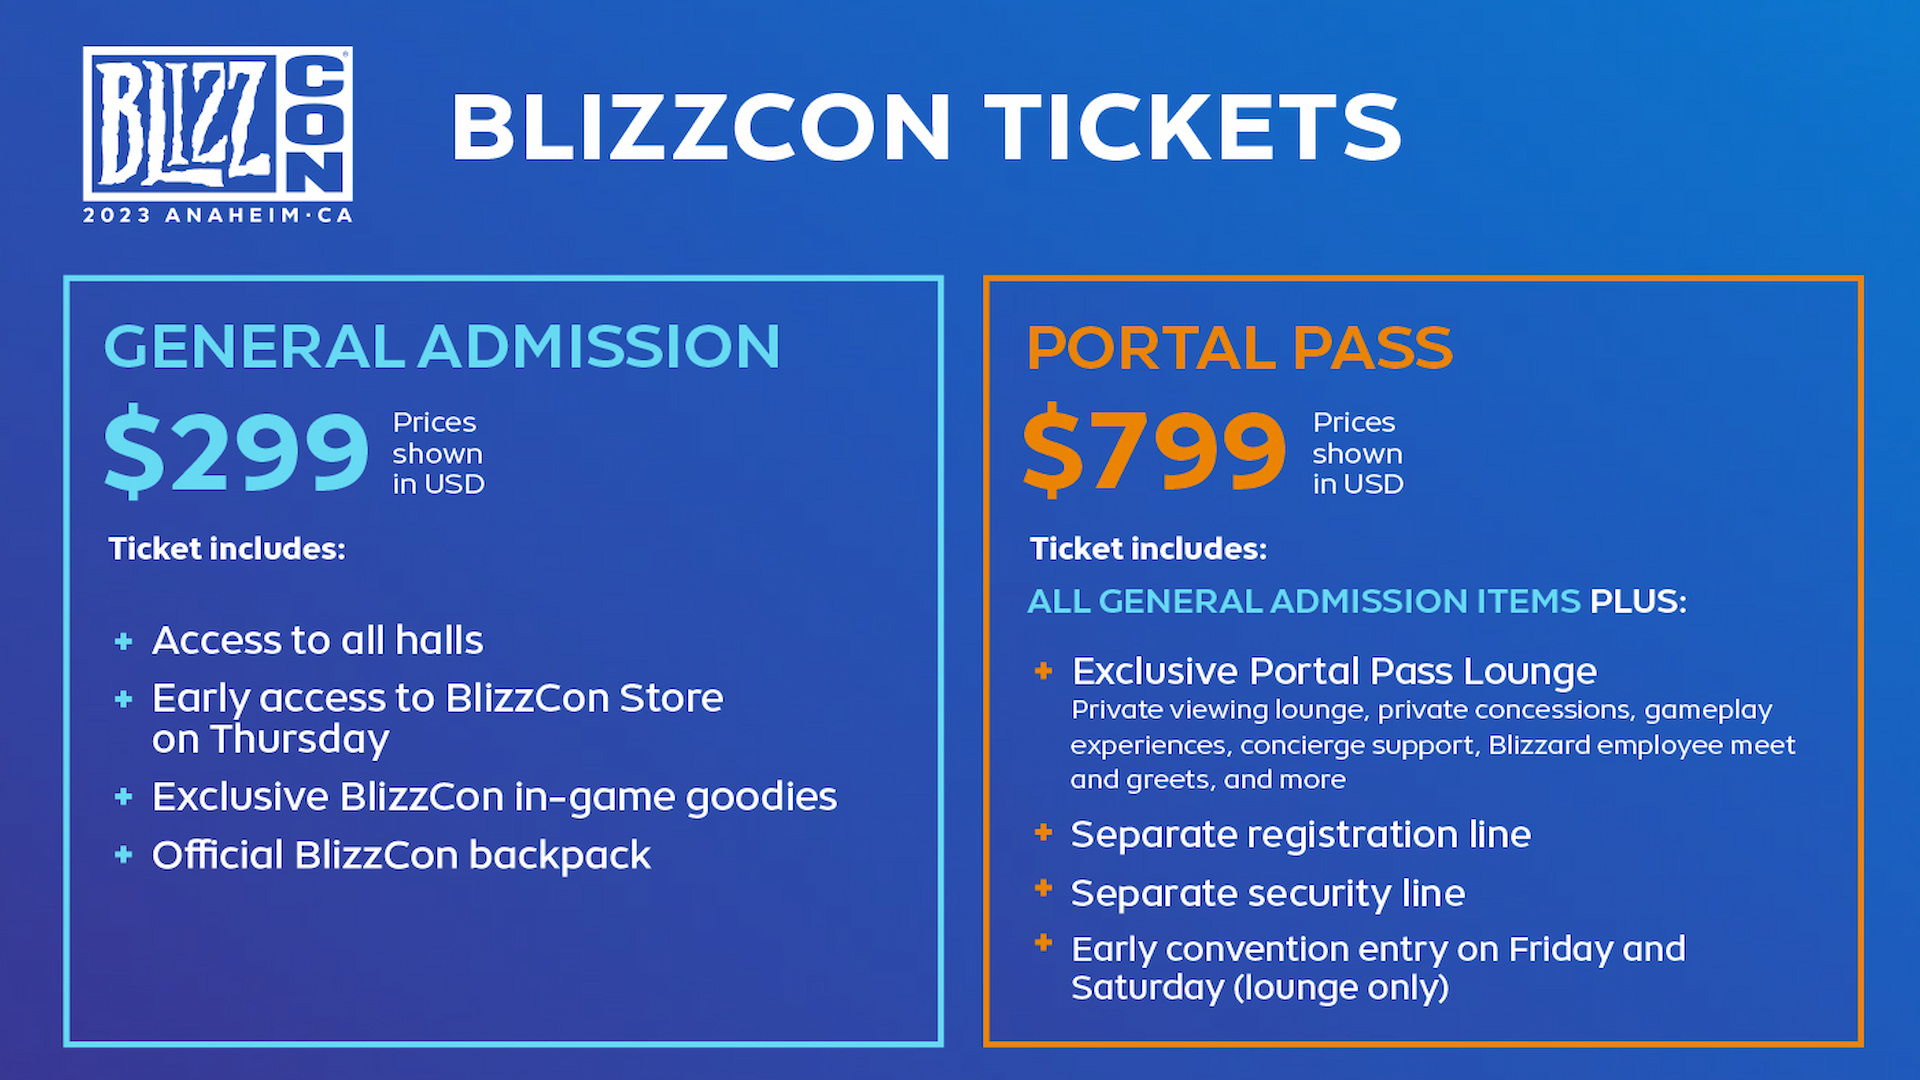 An image of both ticket types, their respective details, and prices